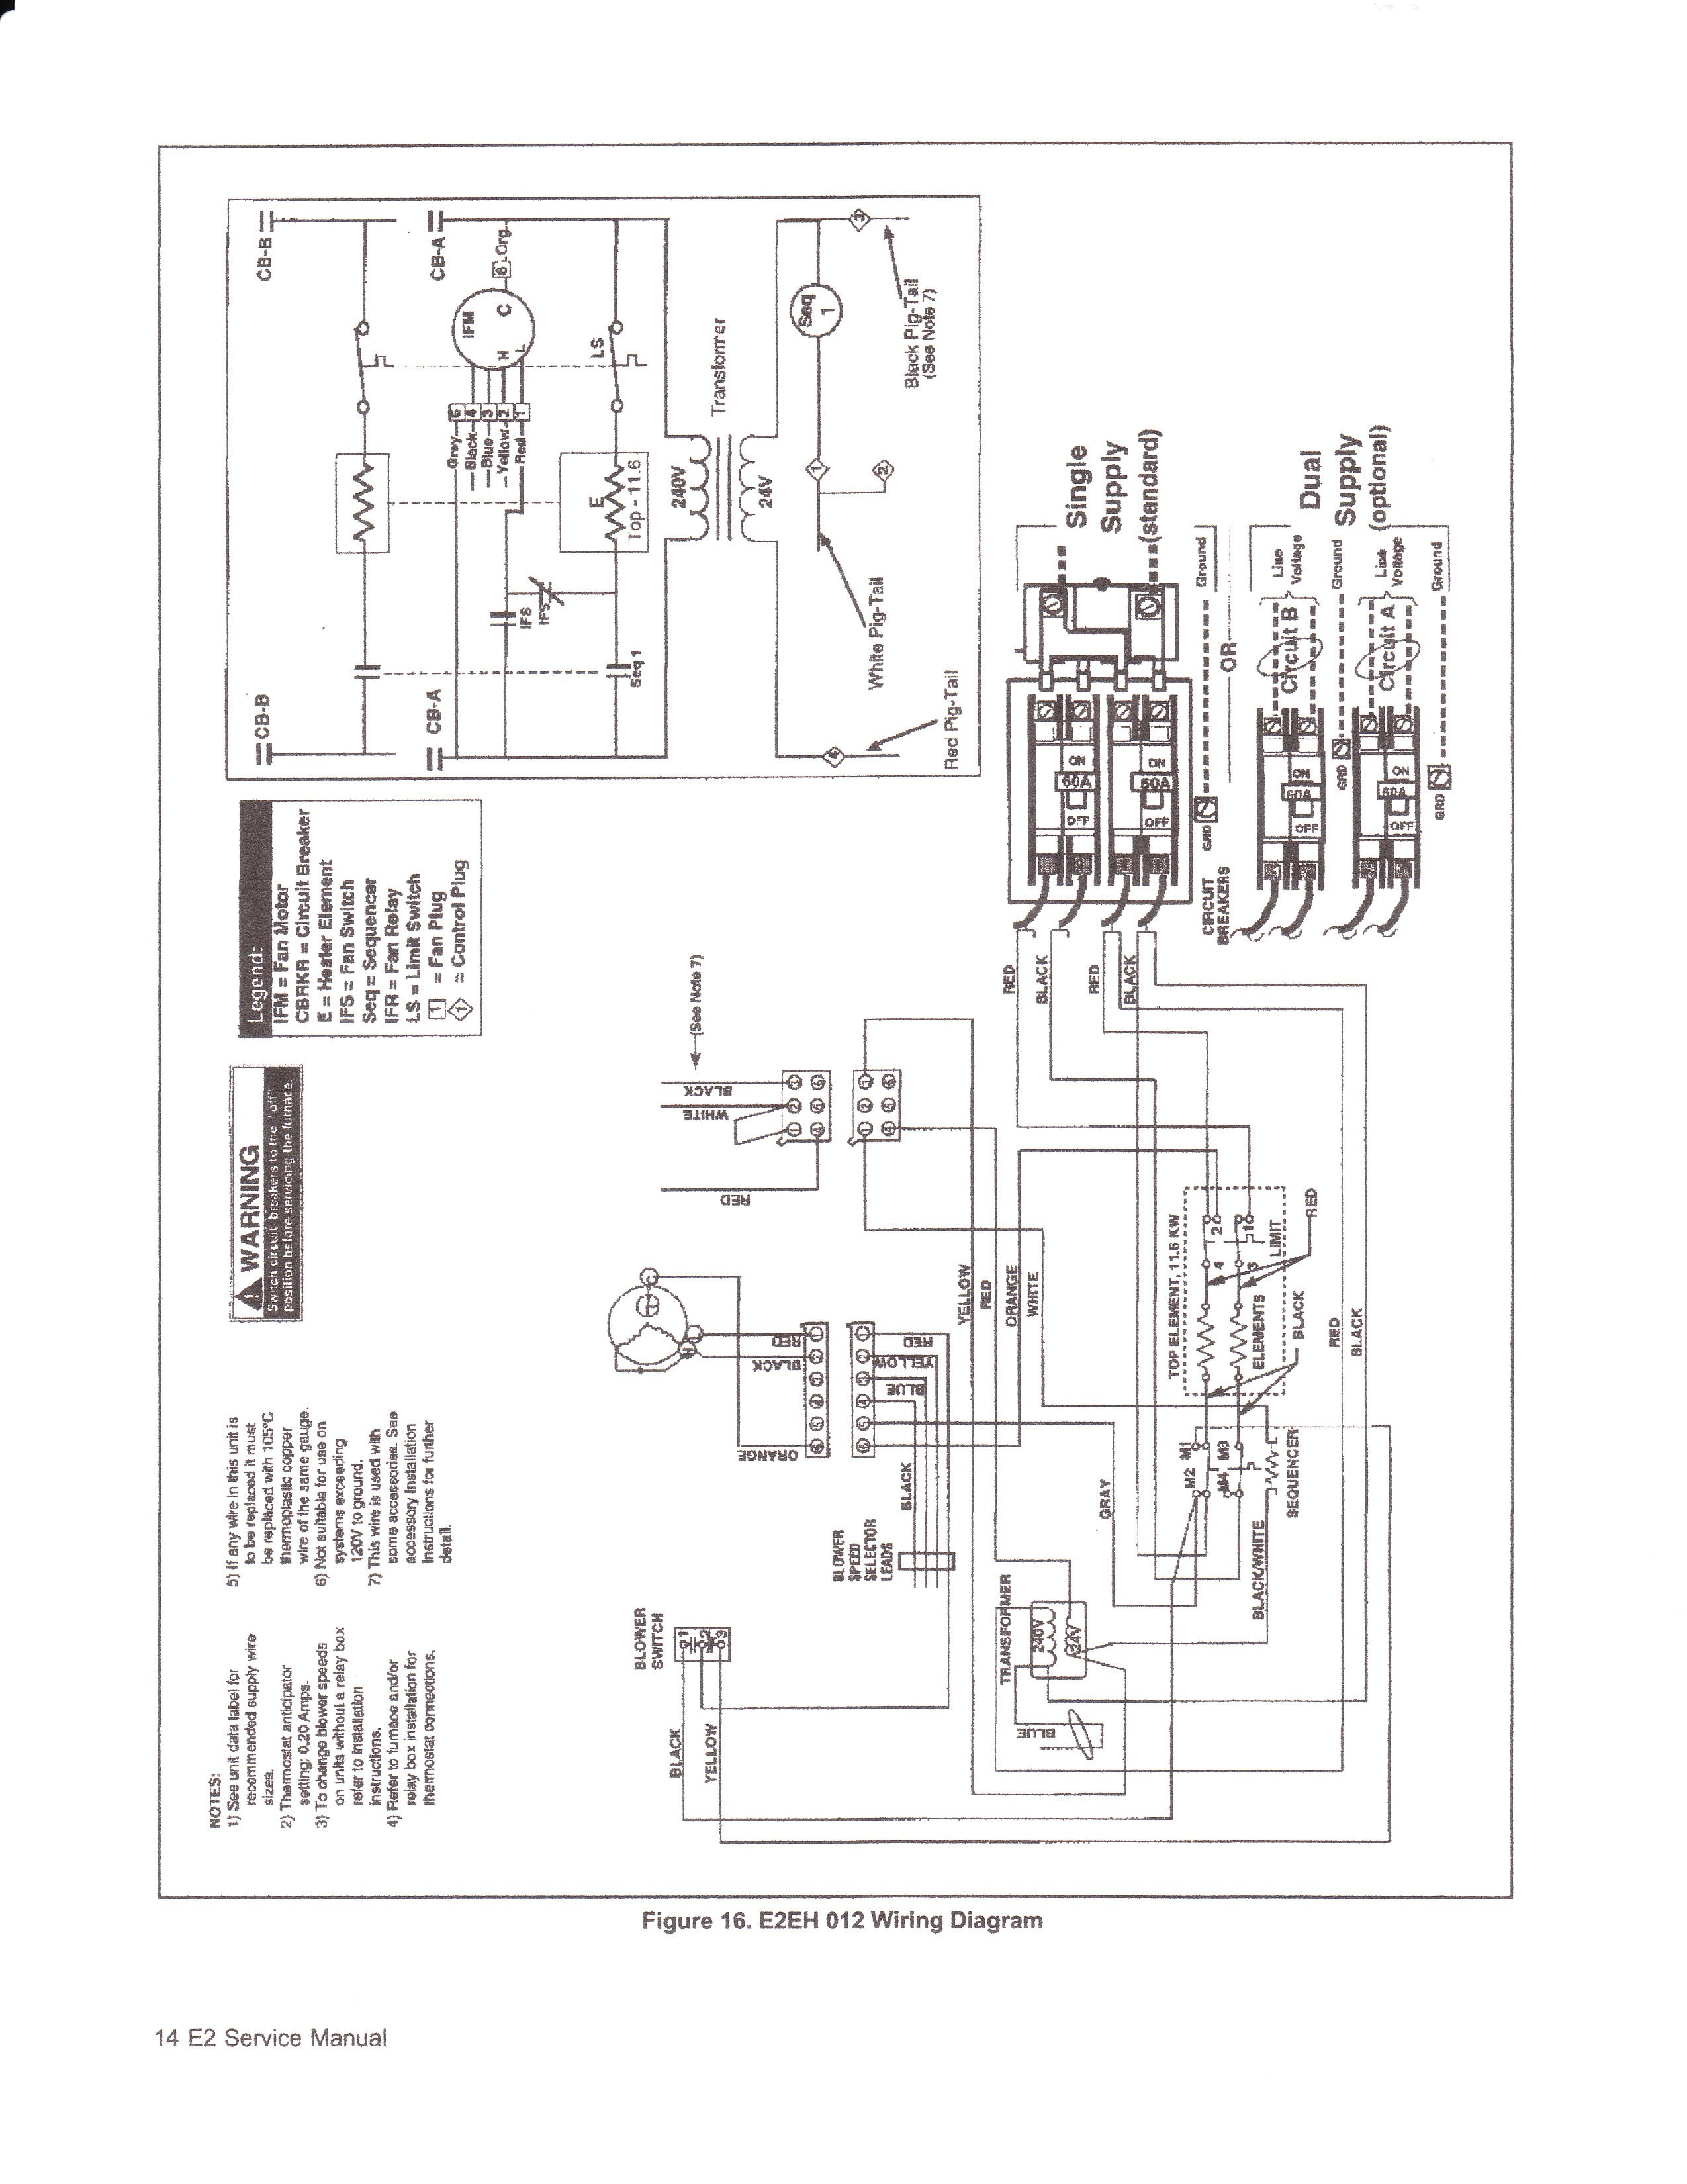 Older Gas Furnace Wiring Diagram New Wiring Diagram for A Gas Furnace Fresh Mobile Home Coleman